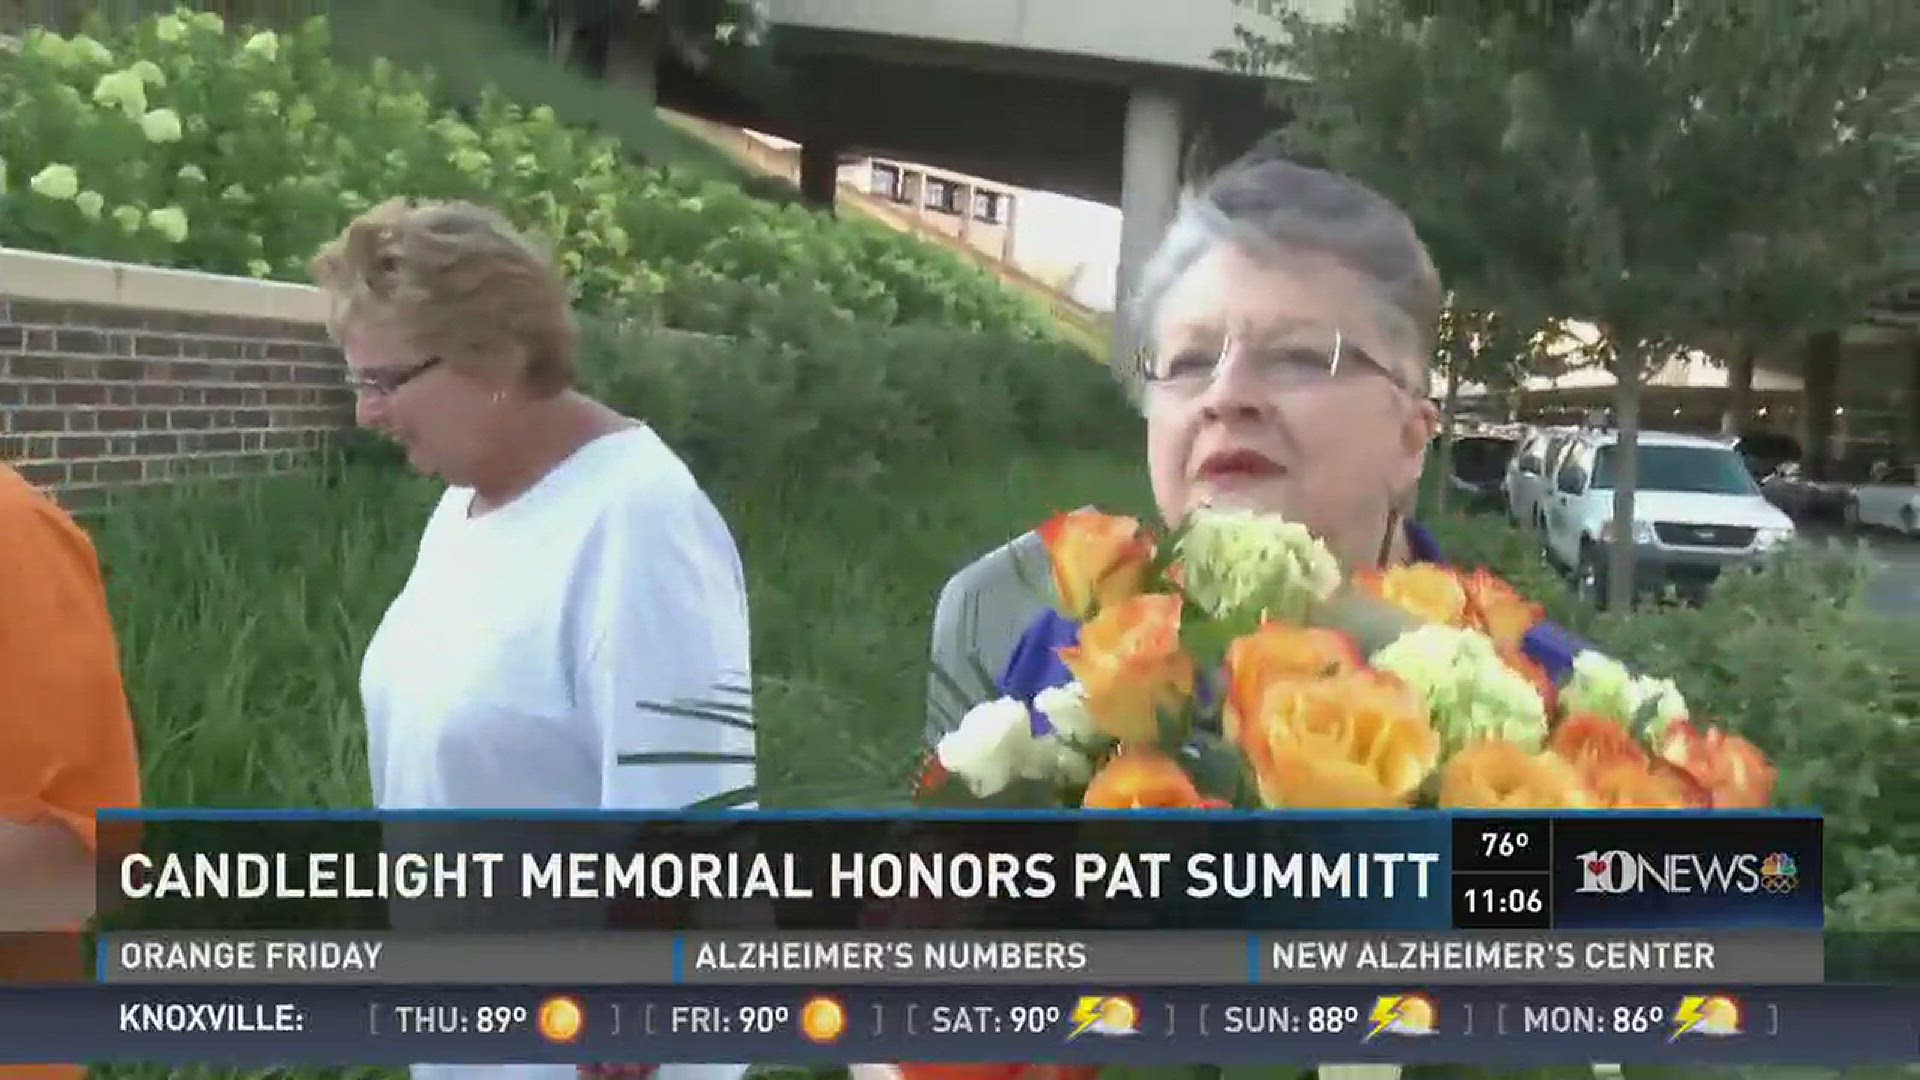 More than 150 people gathered at the Pat Summitt Plaza to pay their respects to the Lady Vols coaching legend.